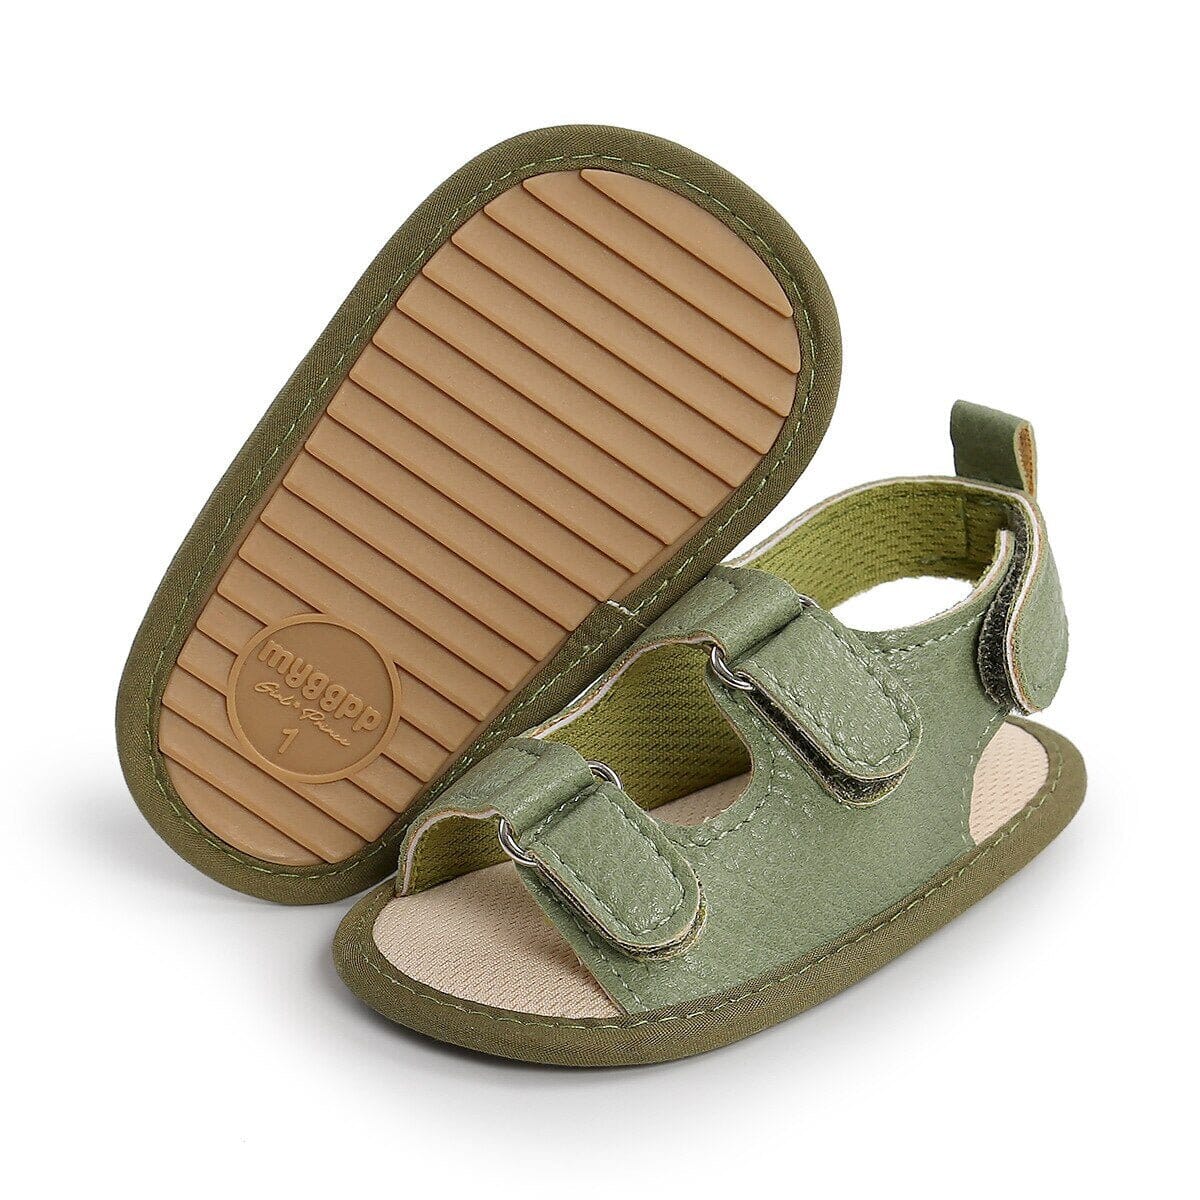 Little Steps Soft Sole Baby Sandals - RoniCorn